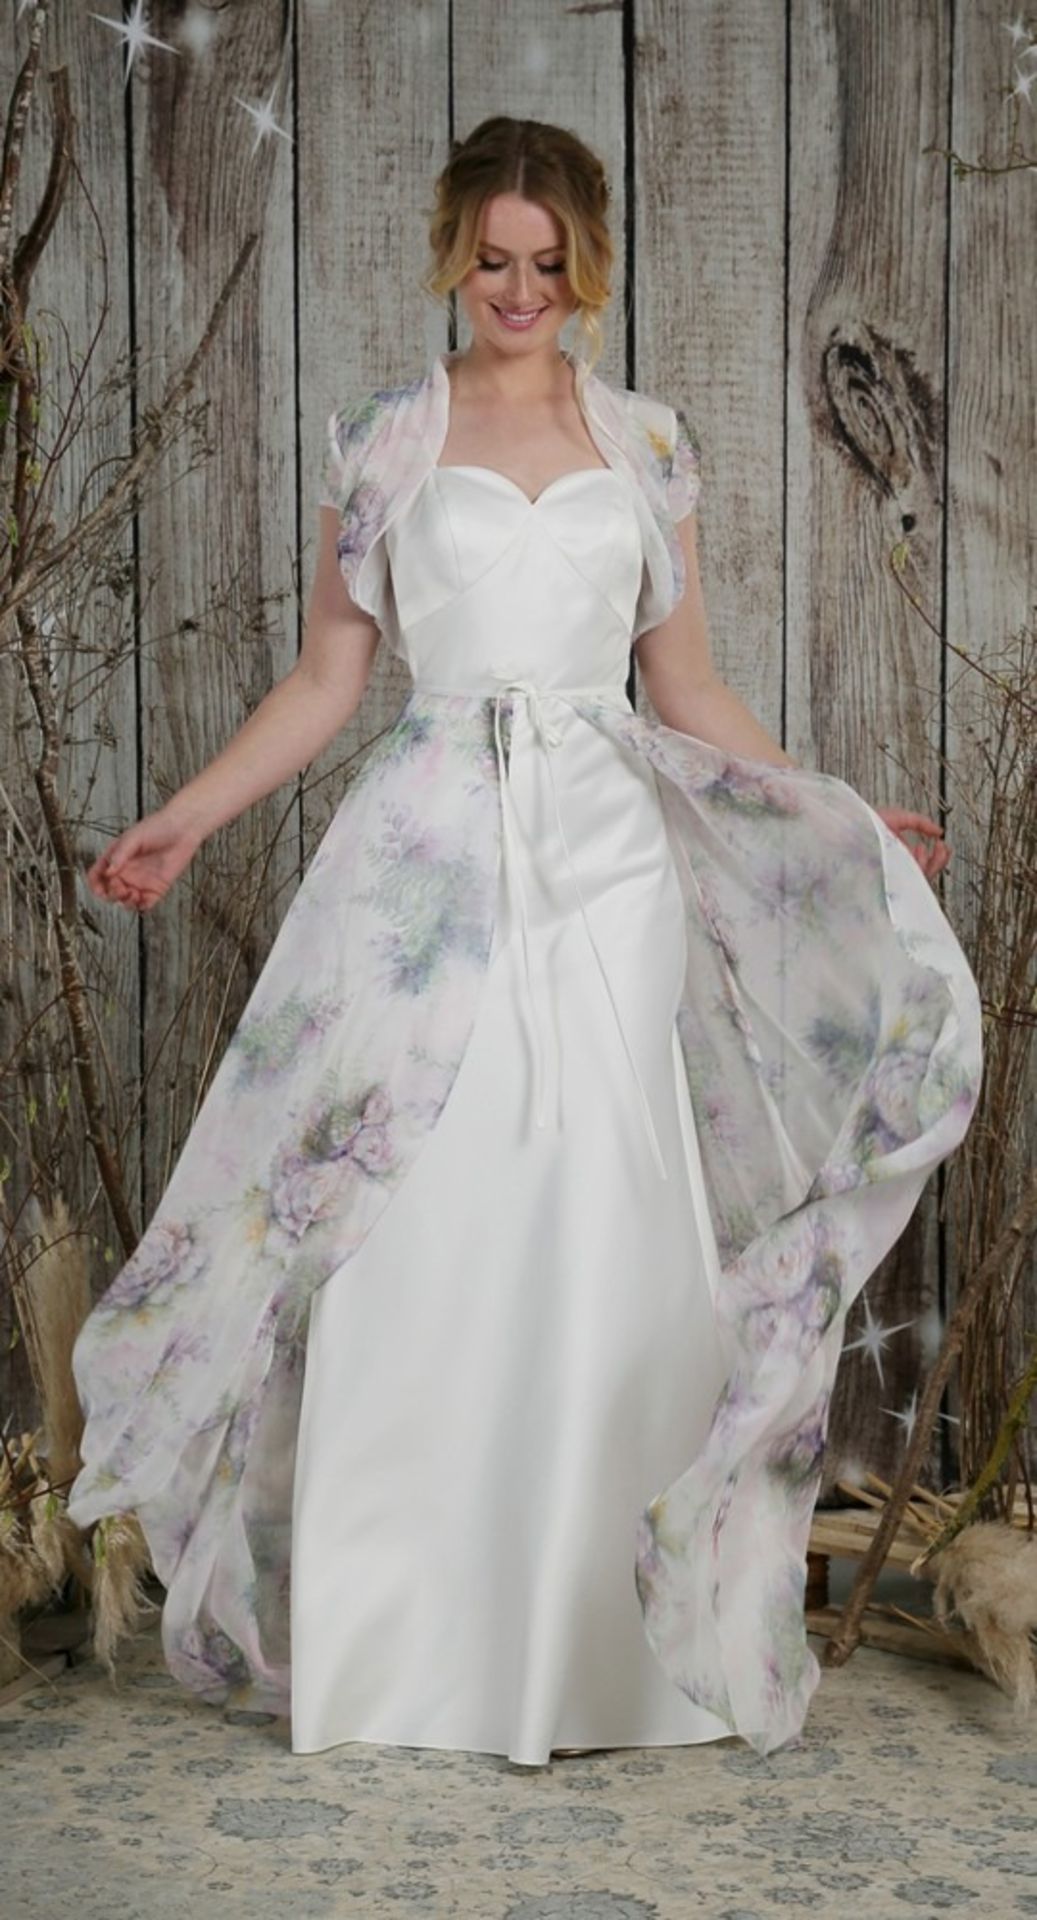 Bridesmaid Or Prom Dresses From Richard Designs Mixed Sizes and Colours. 10 Dresses - Image 6 of 9